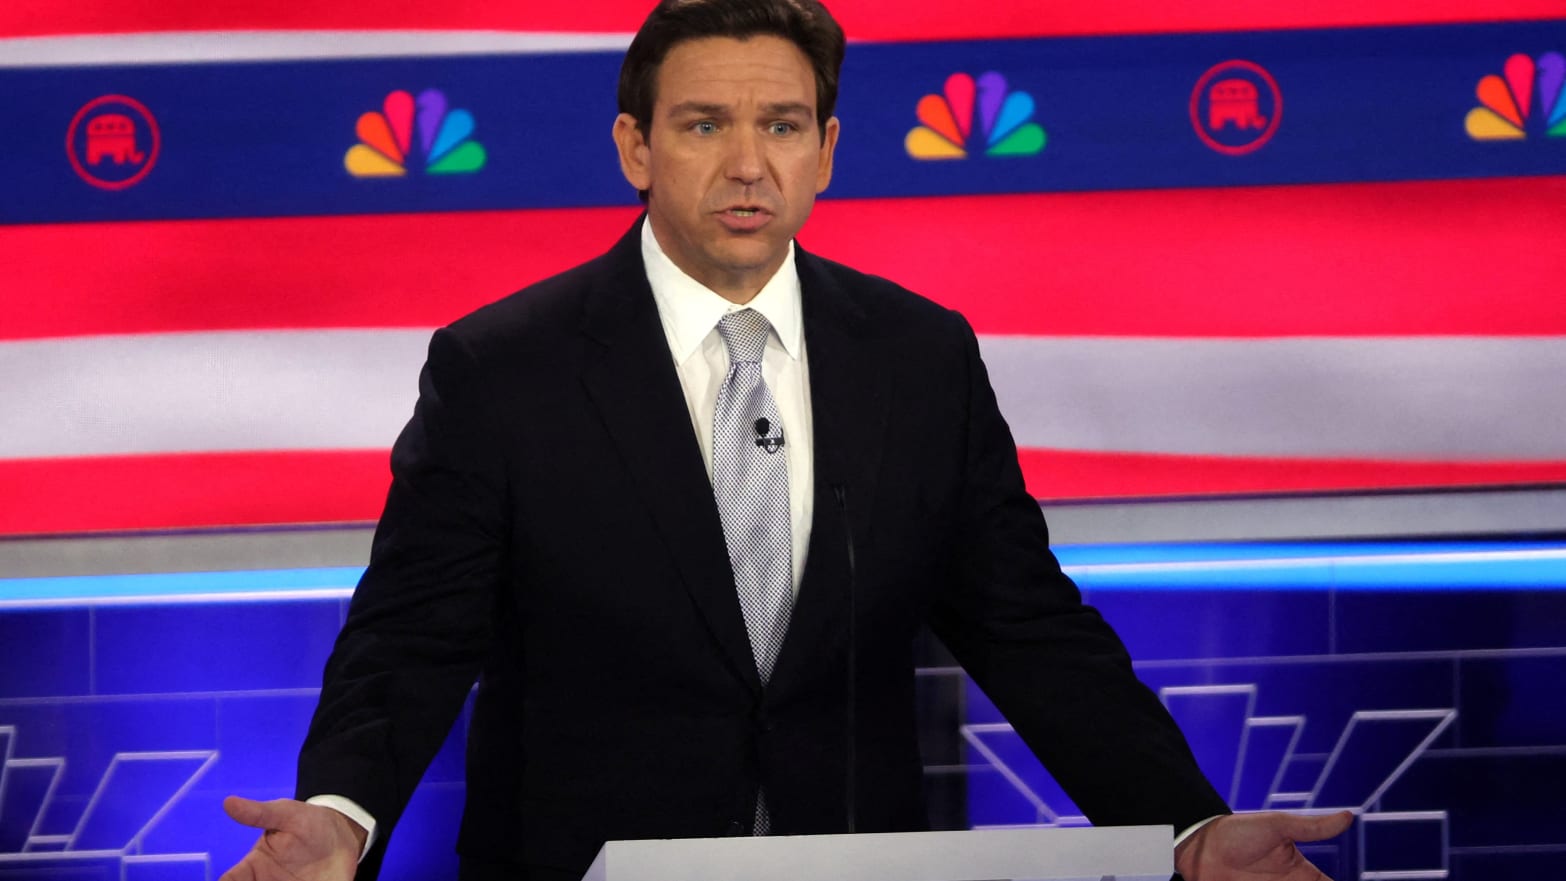 Florida Governor Ron DeSantis speaks at the third Republican candidates' U.S. presidential debate of the 2024 U.S. presidential campaign hosted by NBC News at the Adrienne Arsht Center for the Performing Arts in Miami, Florida